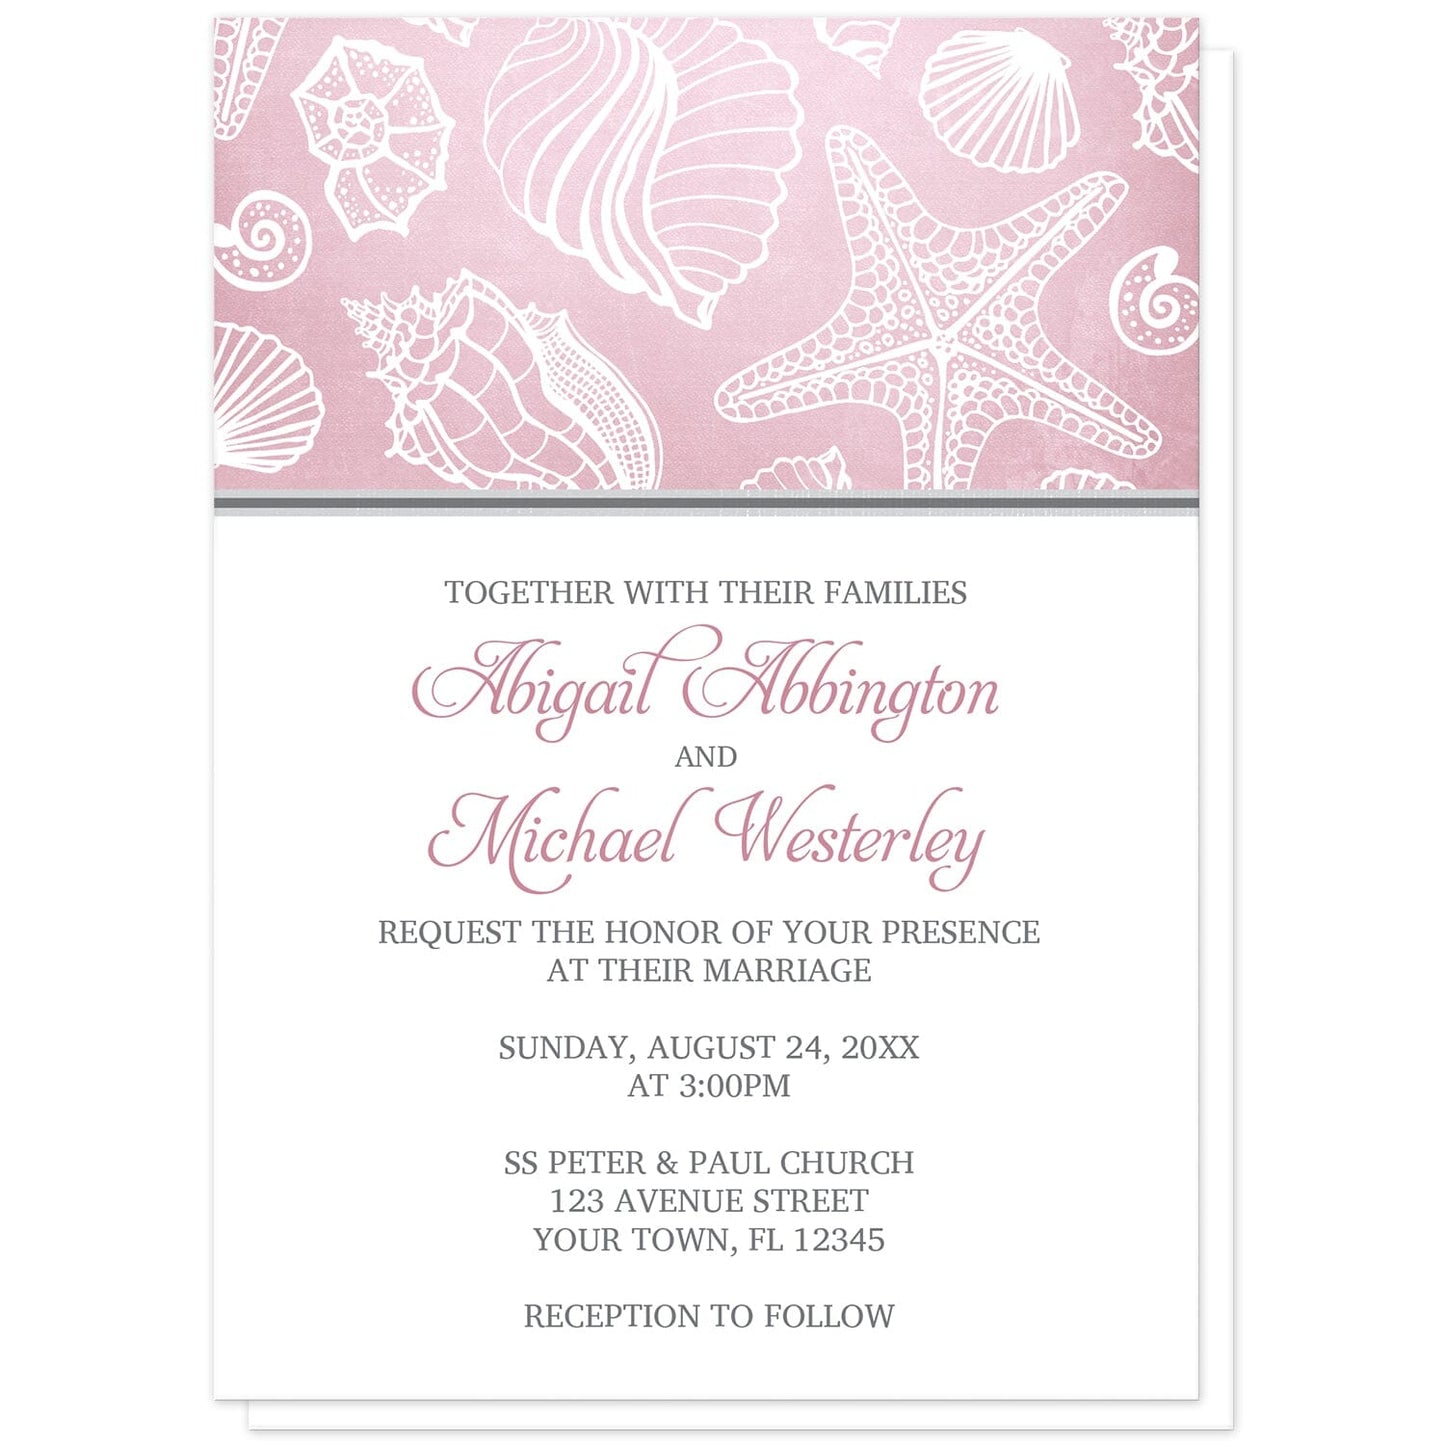 Pink Beach Seashell Pattern Wedding Invitations at Artistically Invited. Pink beach seashell pattern wedding invitations with a white line seashell pattern over an organic-like beachy pink background. Your personalized marriage celebration details are custom printed in pink and gray on white below the pink seashell pattern. 